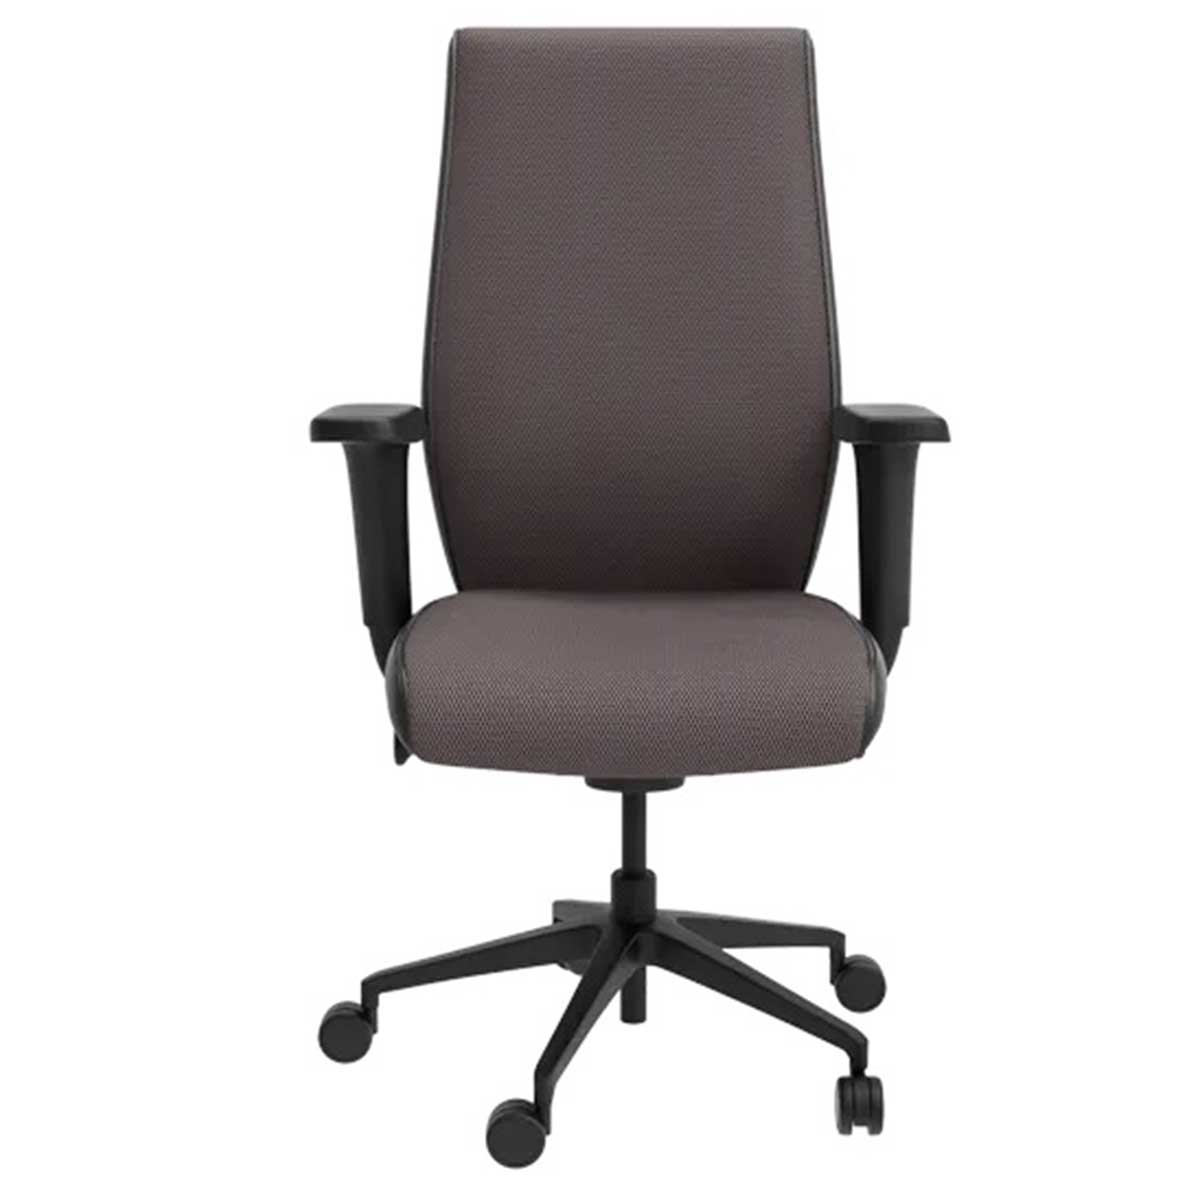 Workstation Chair Manufacturers, Suppliers, Exporters in Delhi